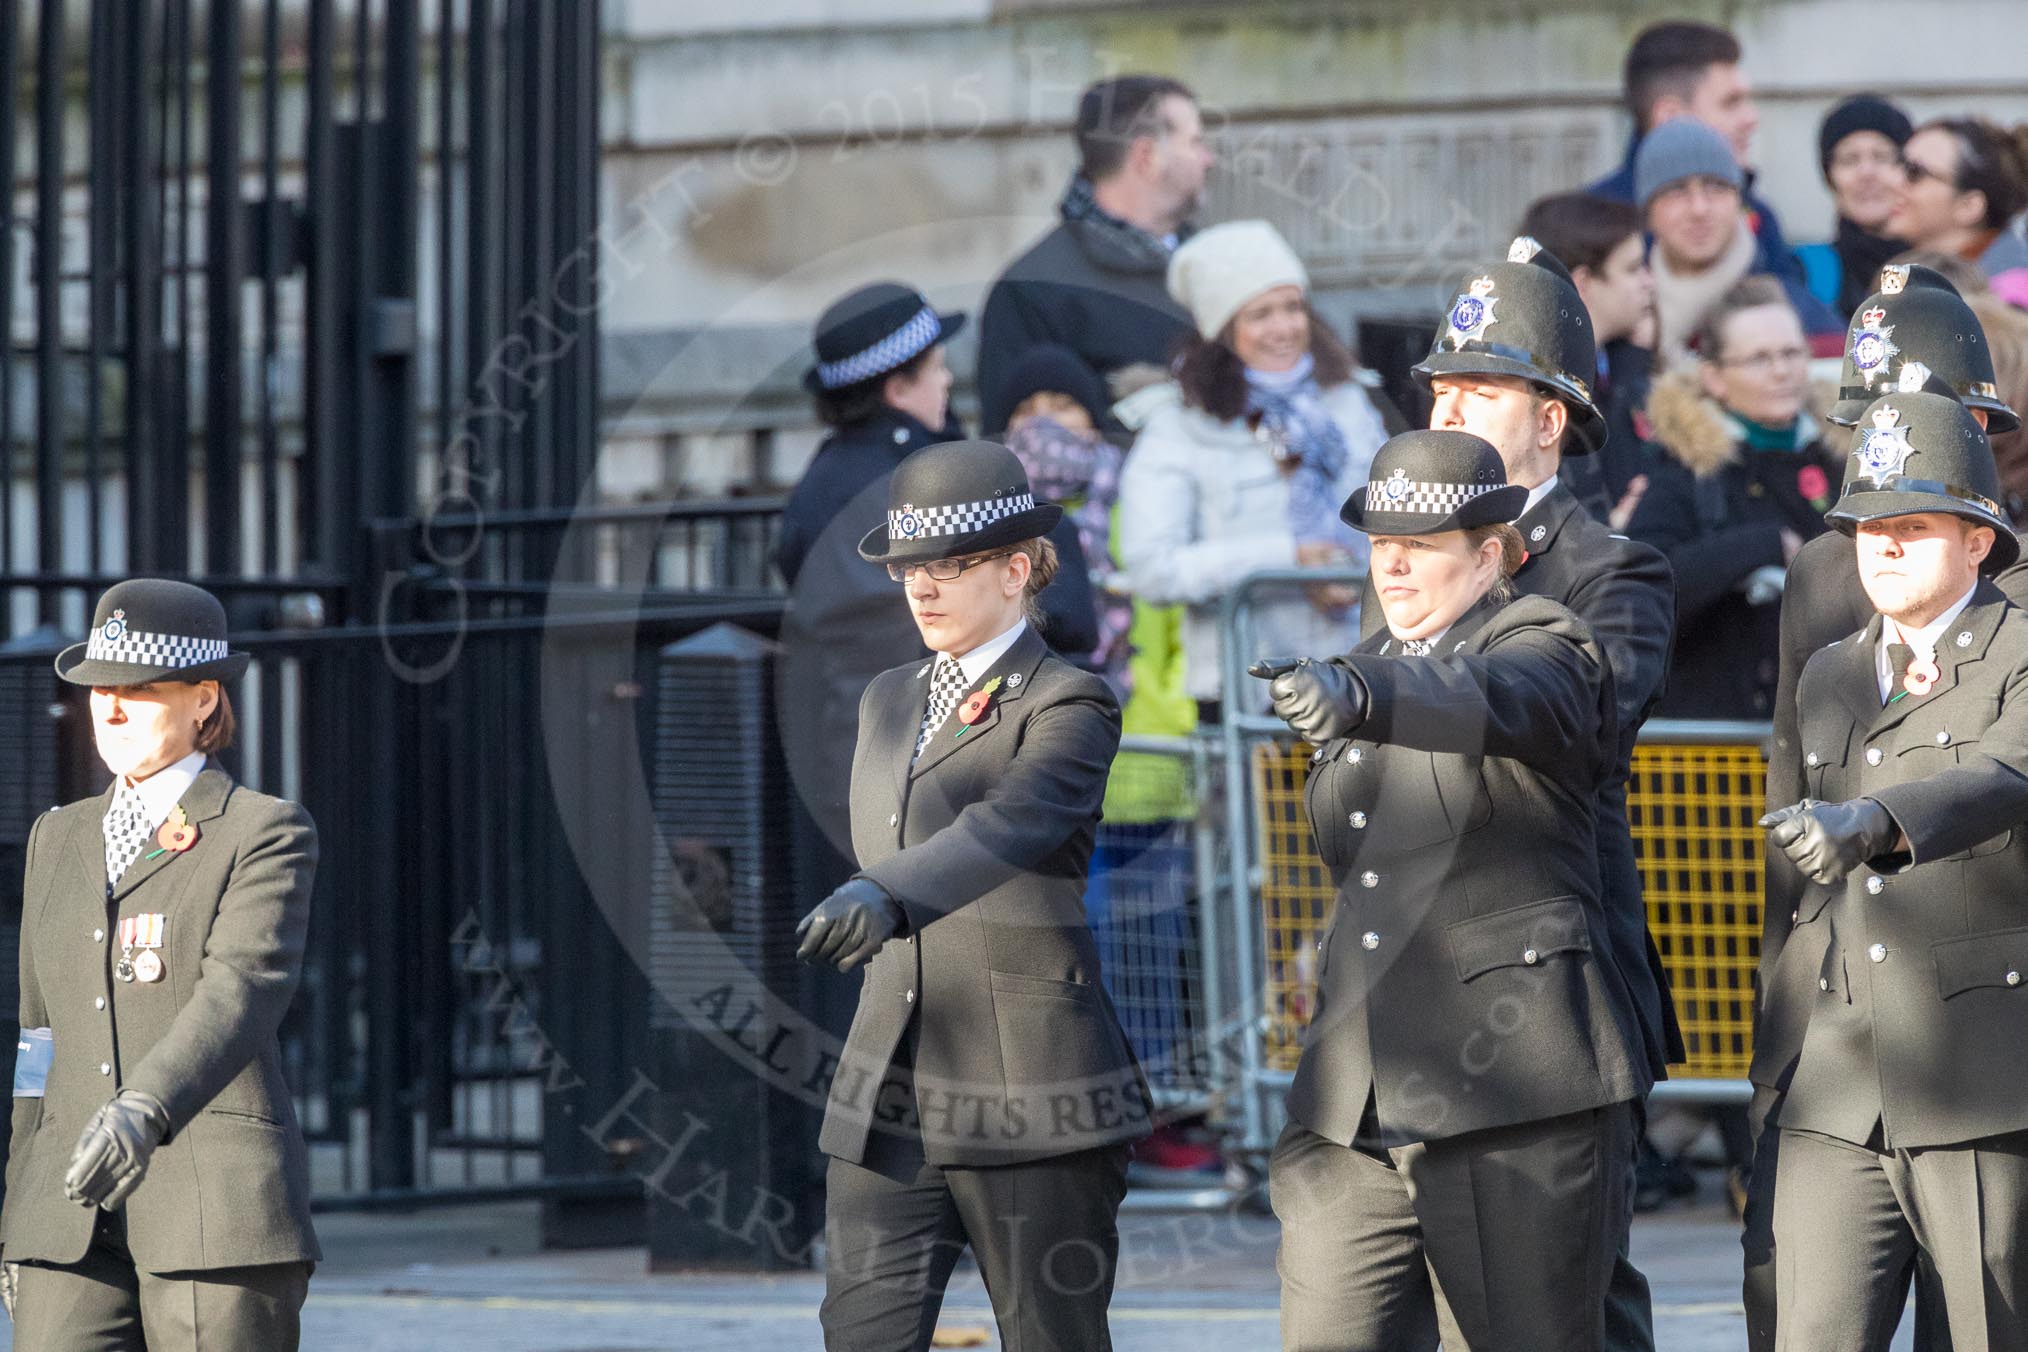 March Past, Remembrance Sunday at the Cenotaph 2016: M38 Cheshire Special Constabulary.
Cenotaph, Whitehall, London SW1,
London,
Greater London,
United Kingdom,
on 13 November 2016 at 13:19, image #2915